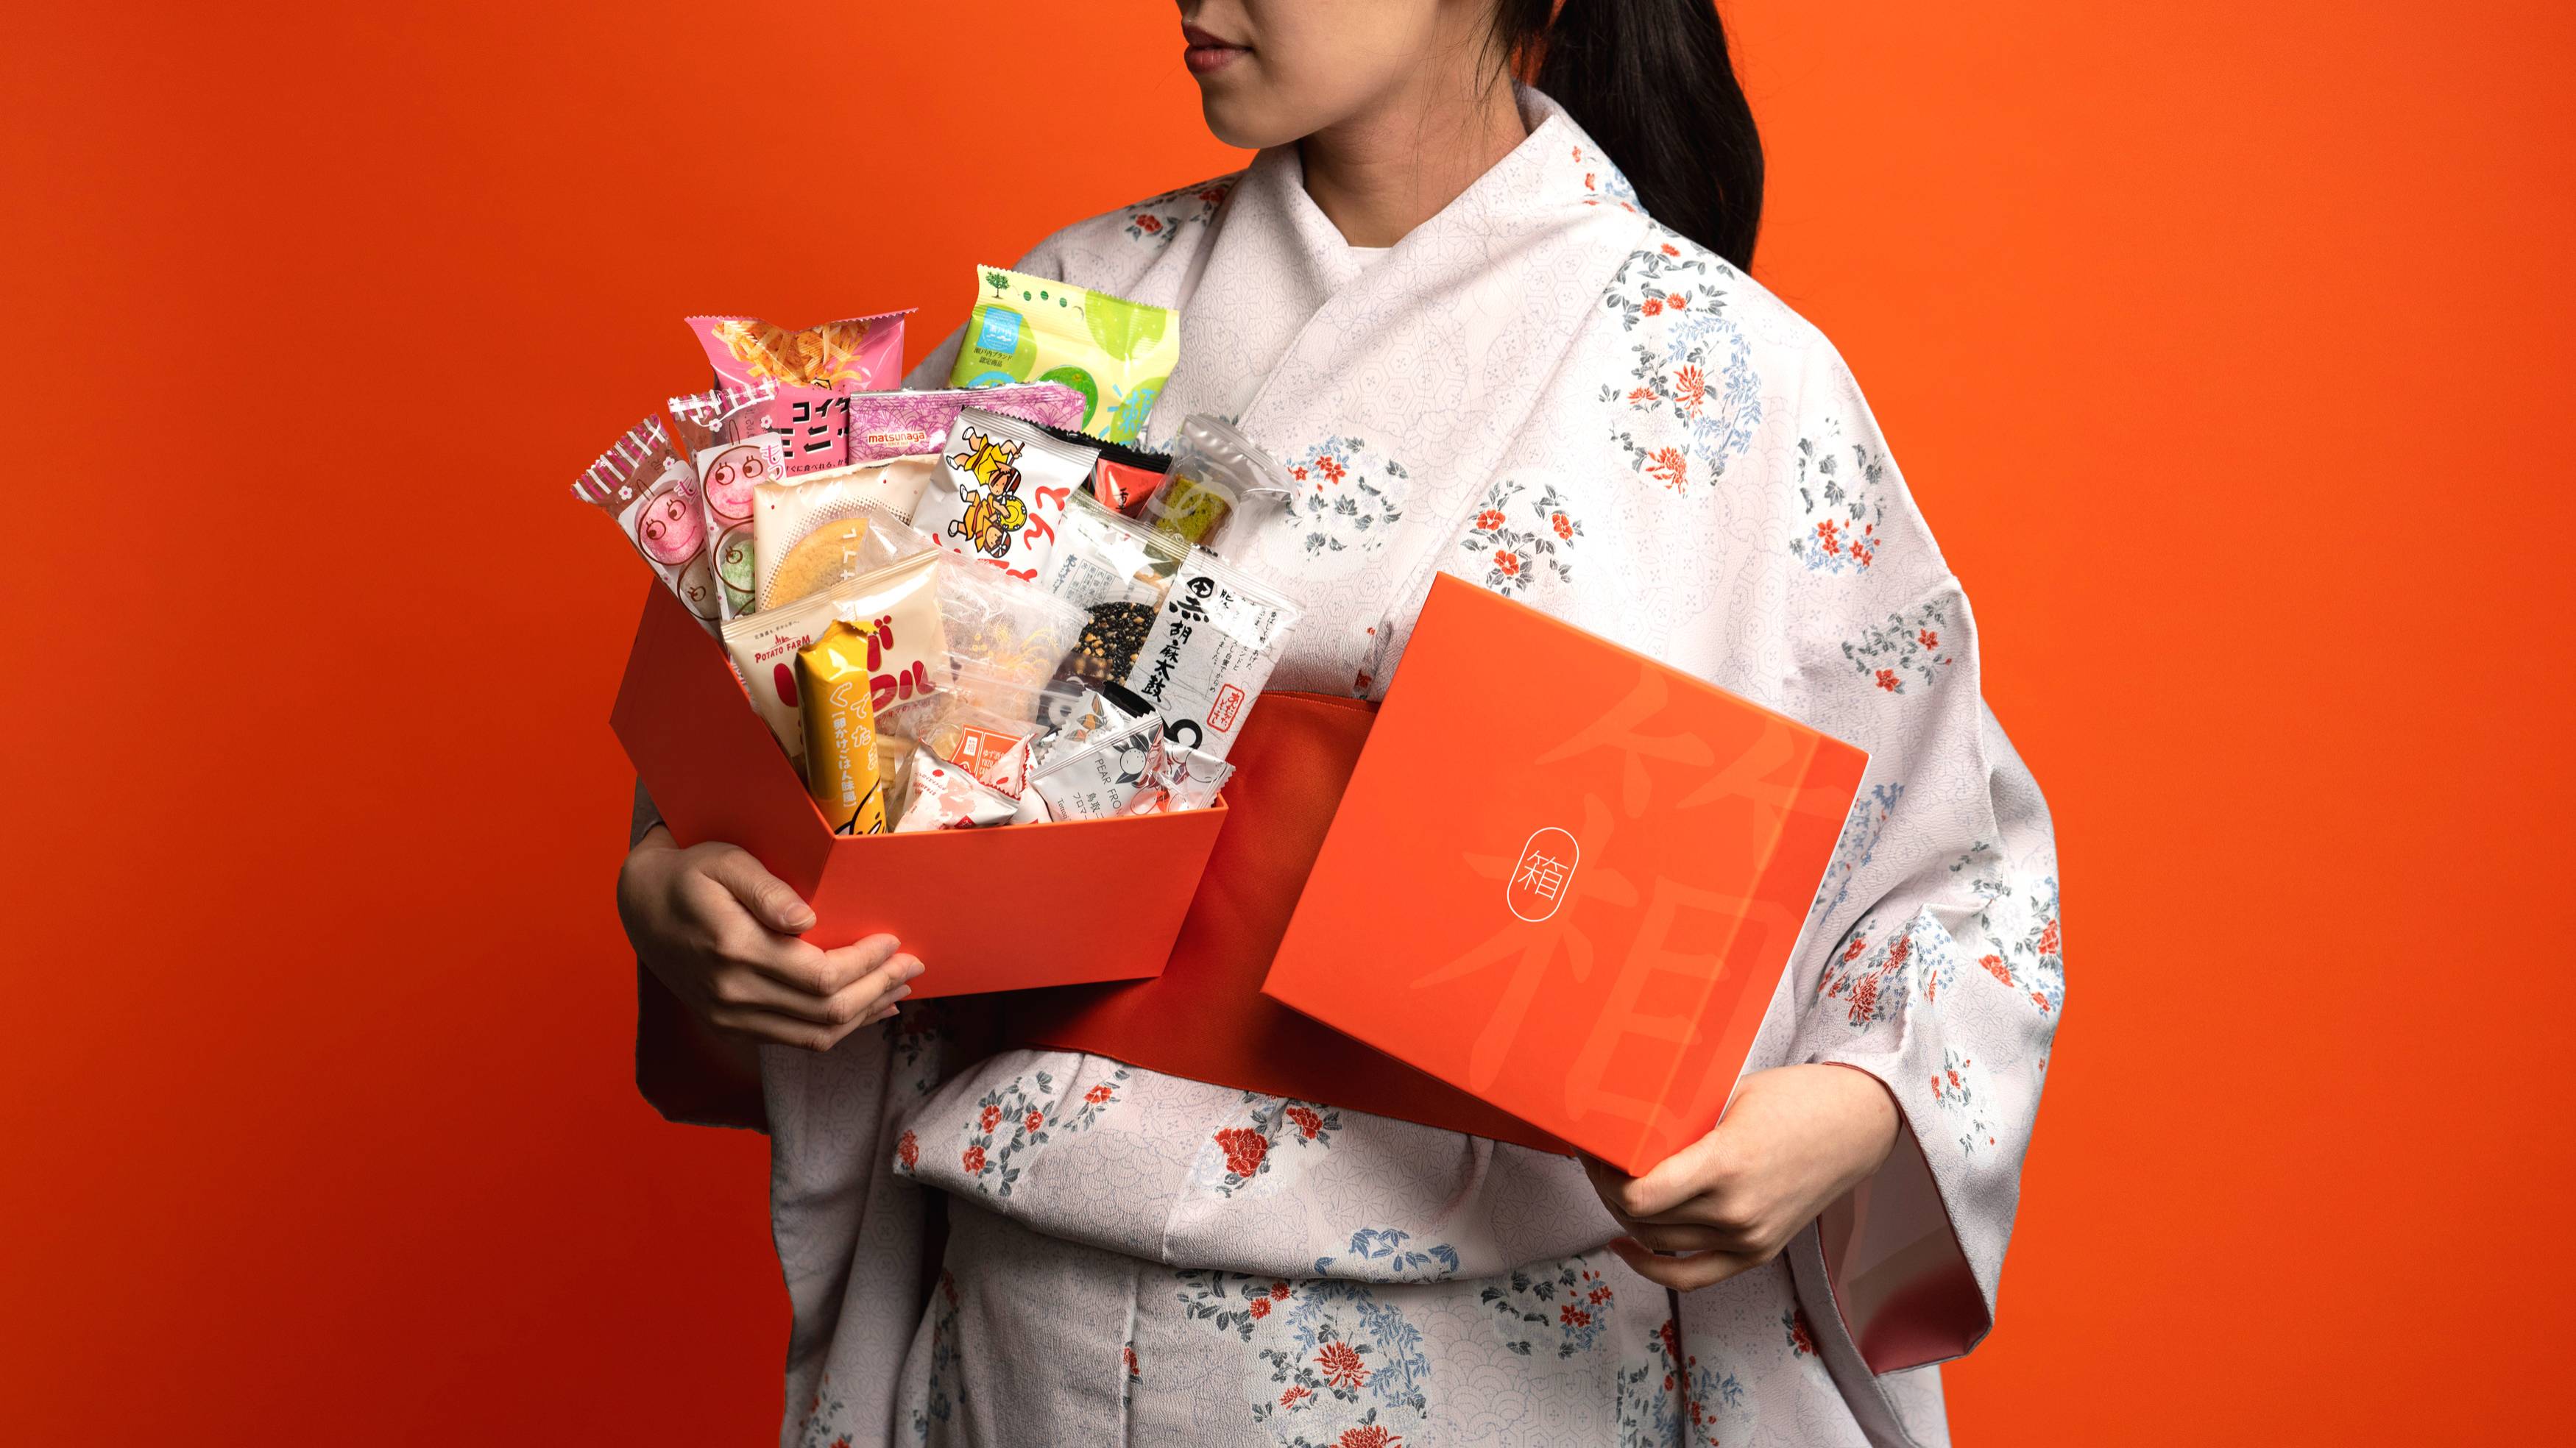 Seasons of snacks: Bokksu’s mission is to “connect people and sustain culture through food and media.” | COURTESY OF BOKKSU